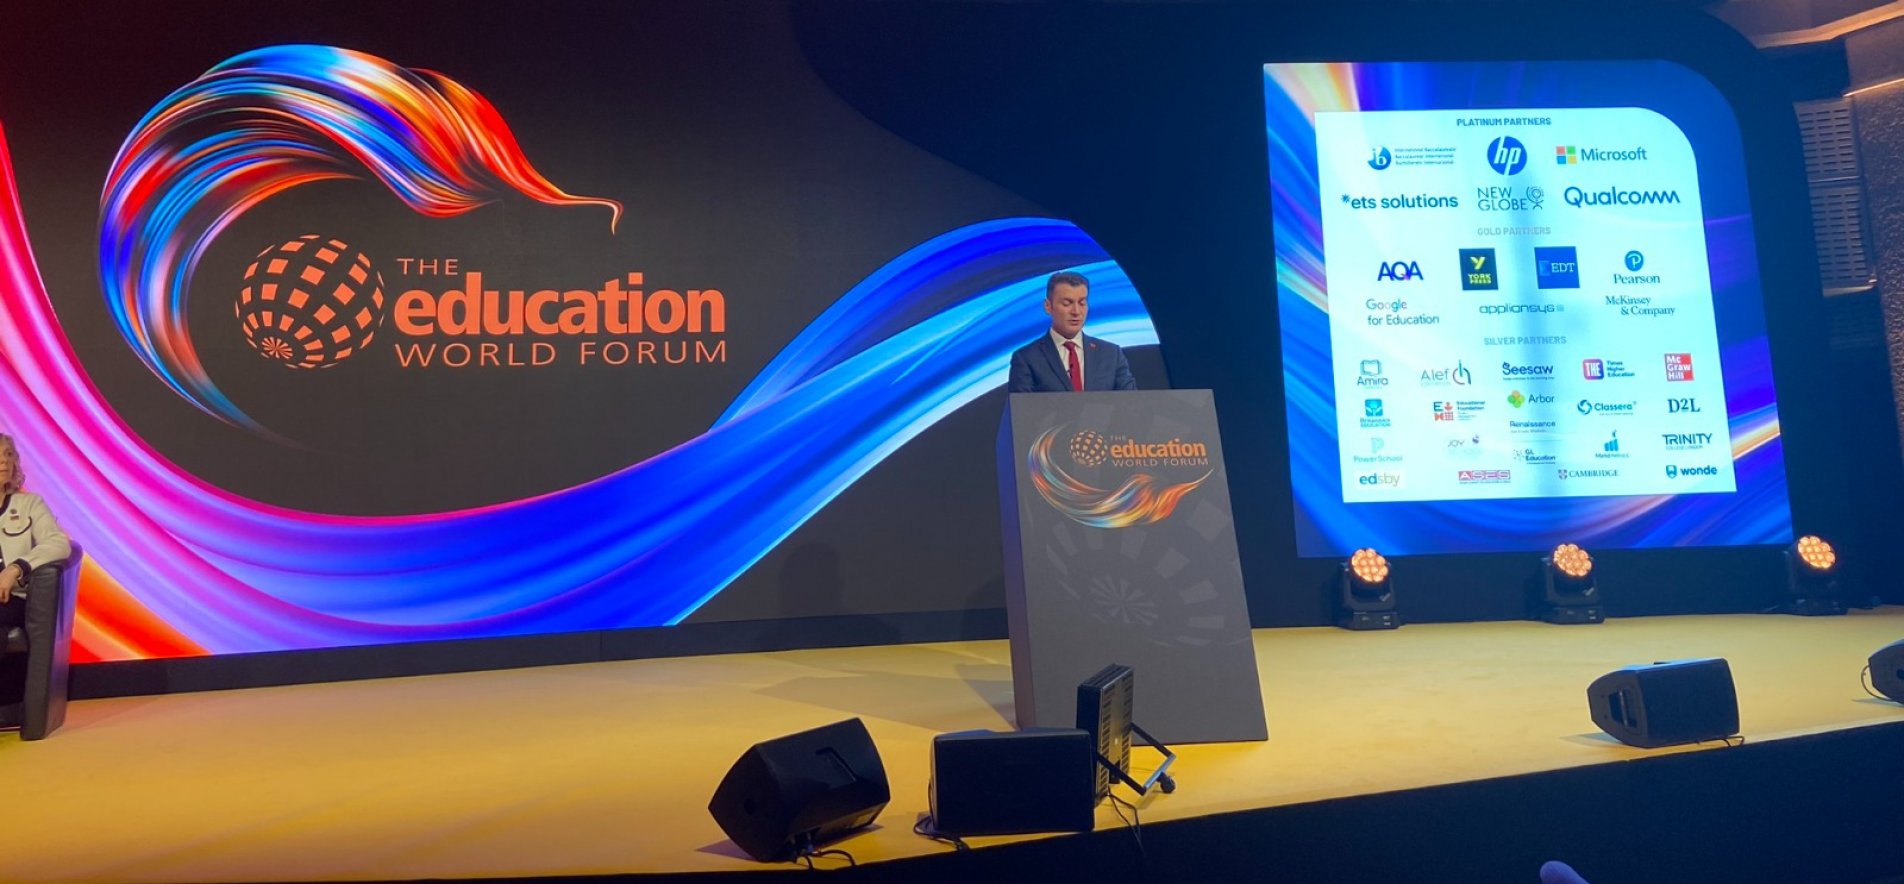 THE EDUCATION WORLD FORUM HELD IN LONDON